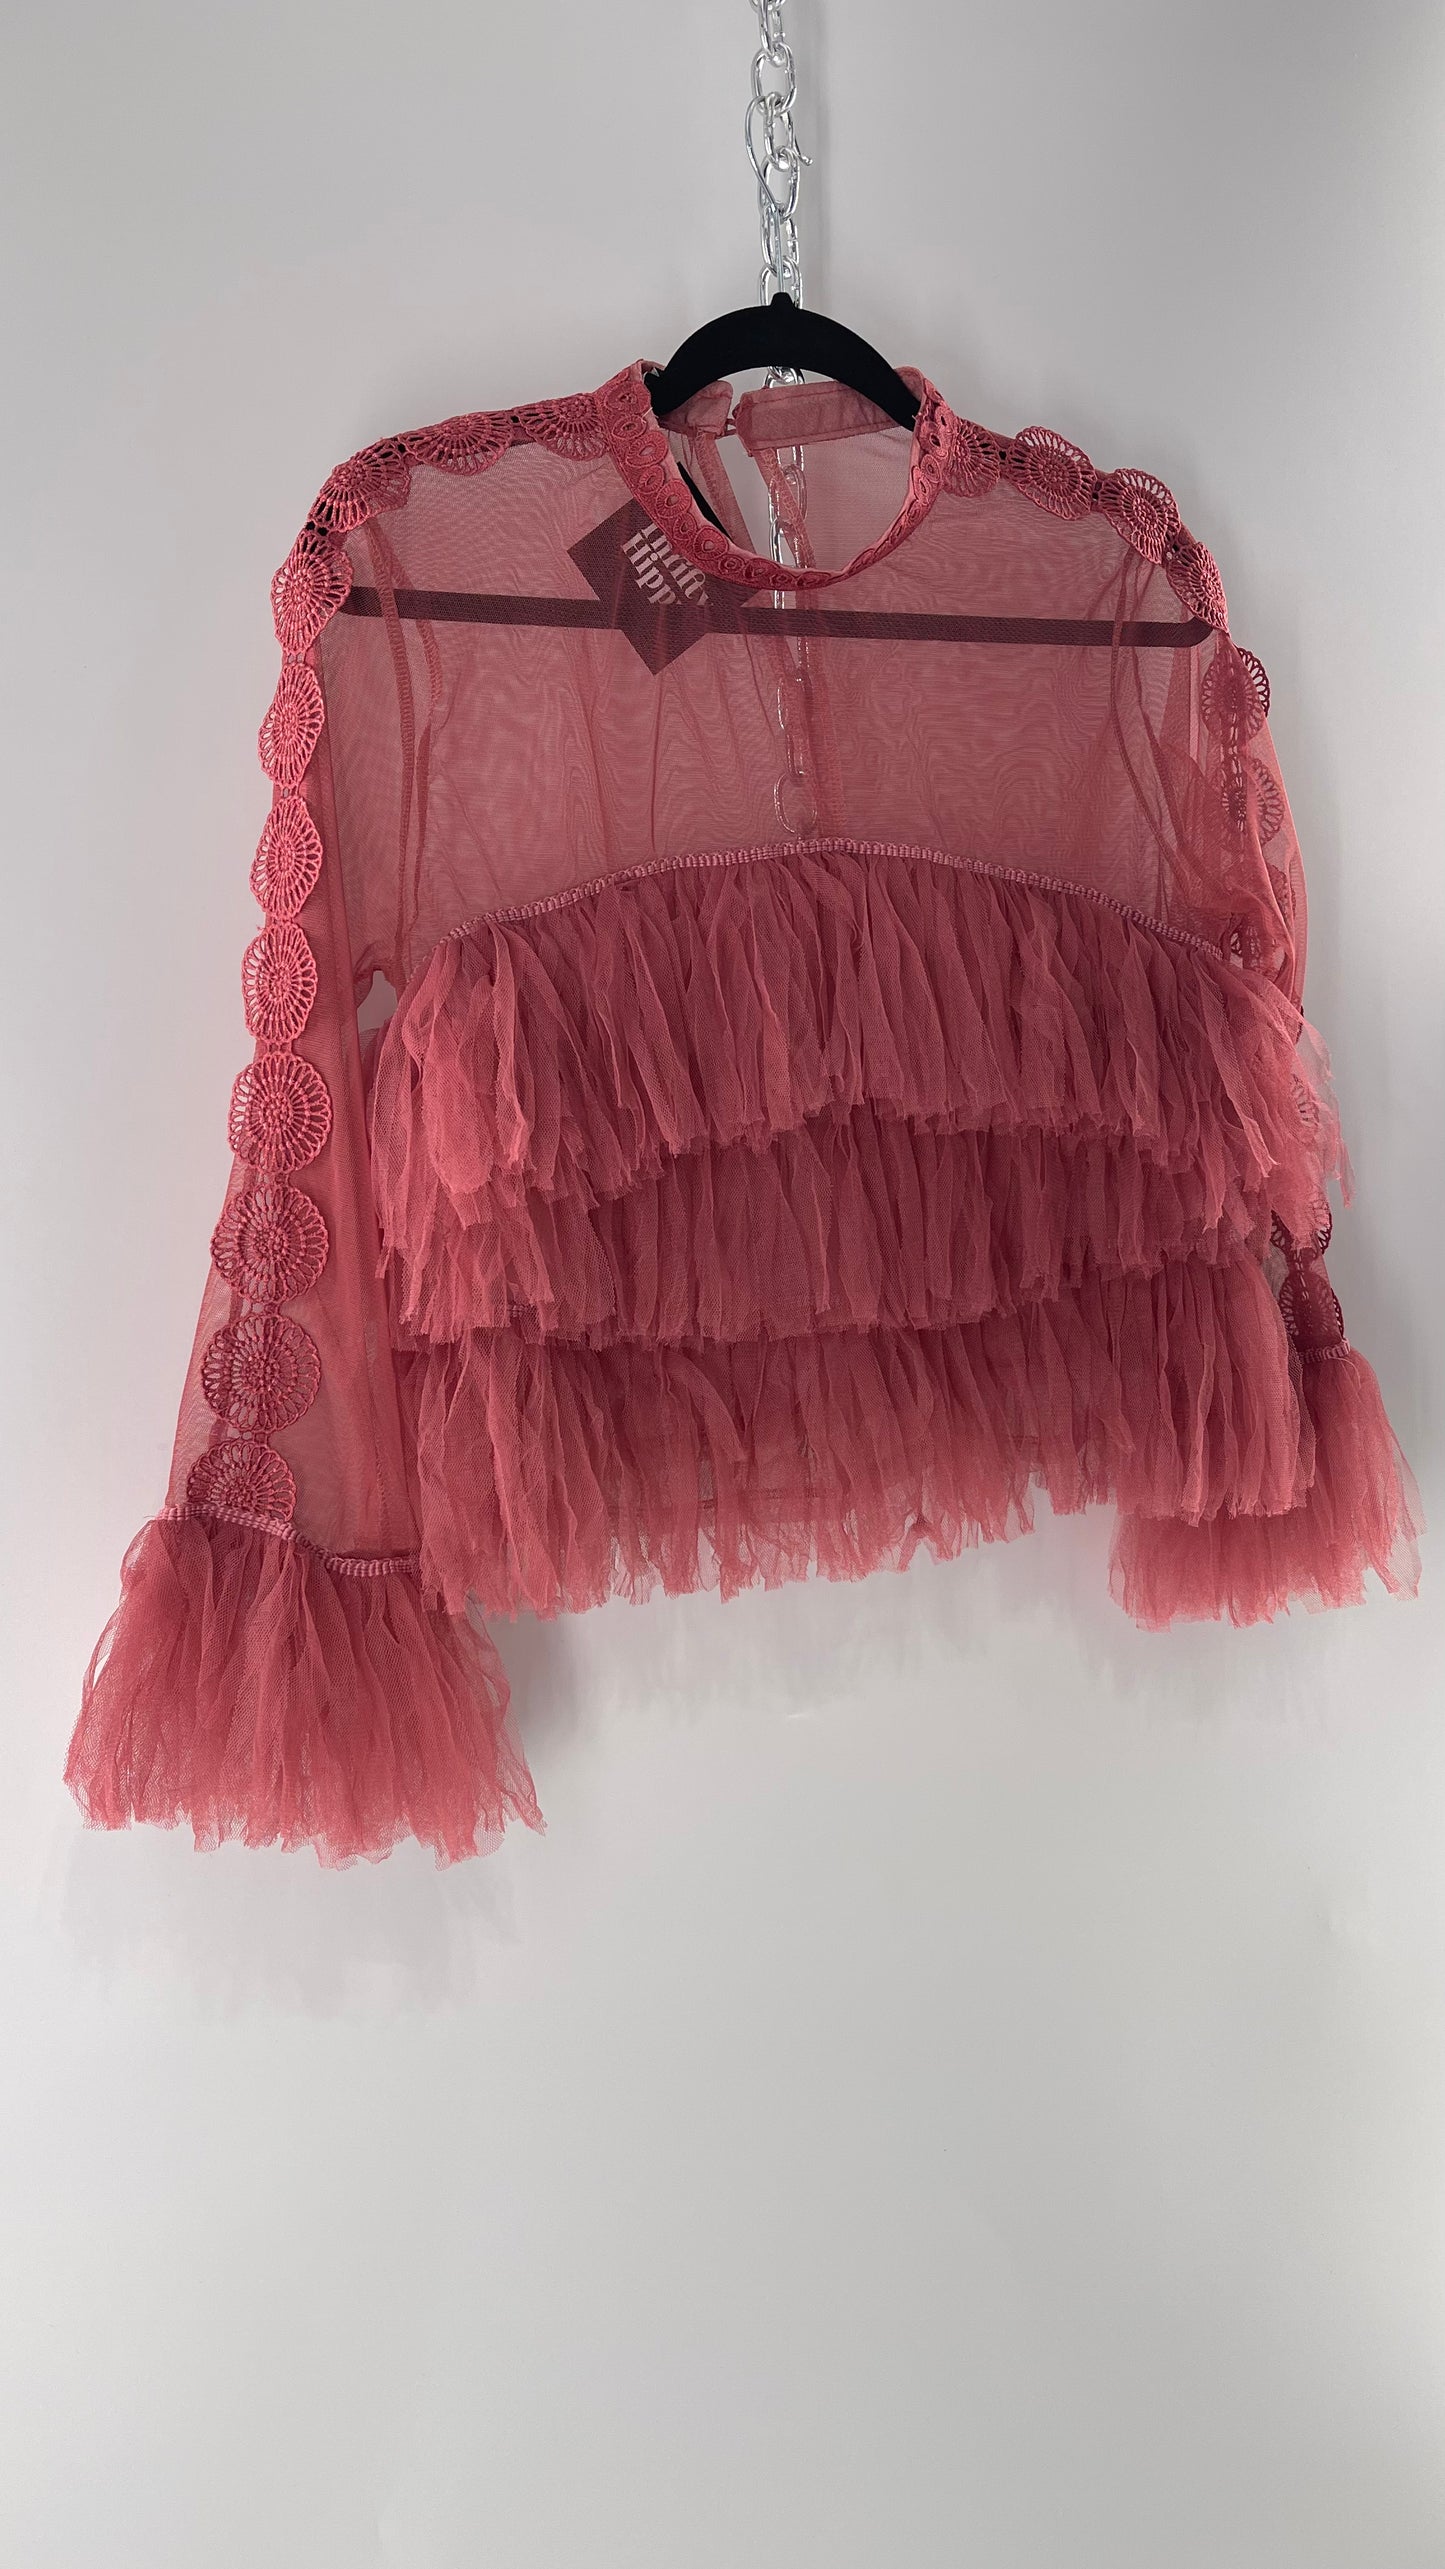 Ups & Downs Pink Mesh Blouse with Ruffled Body/Cuffs and Lace Ribbon Detailing (Medium)